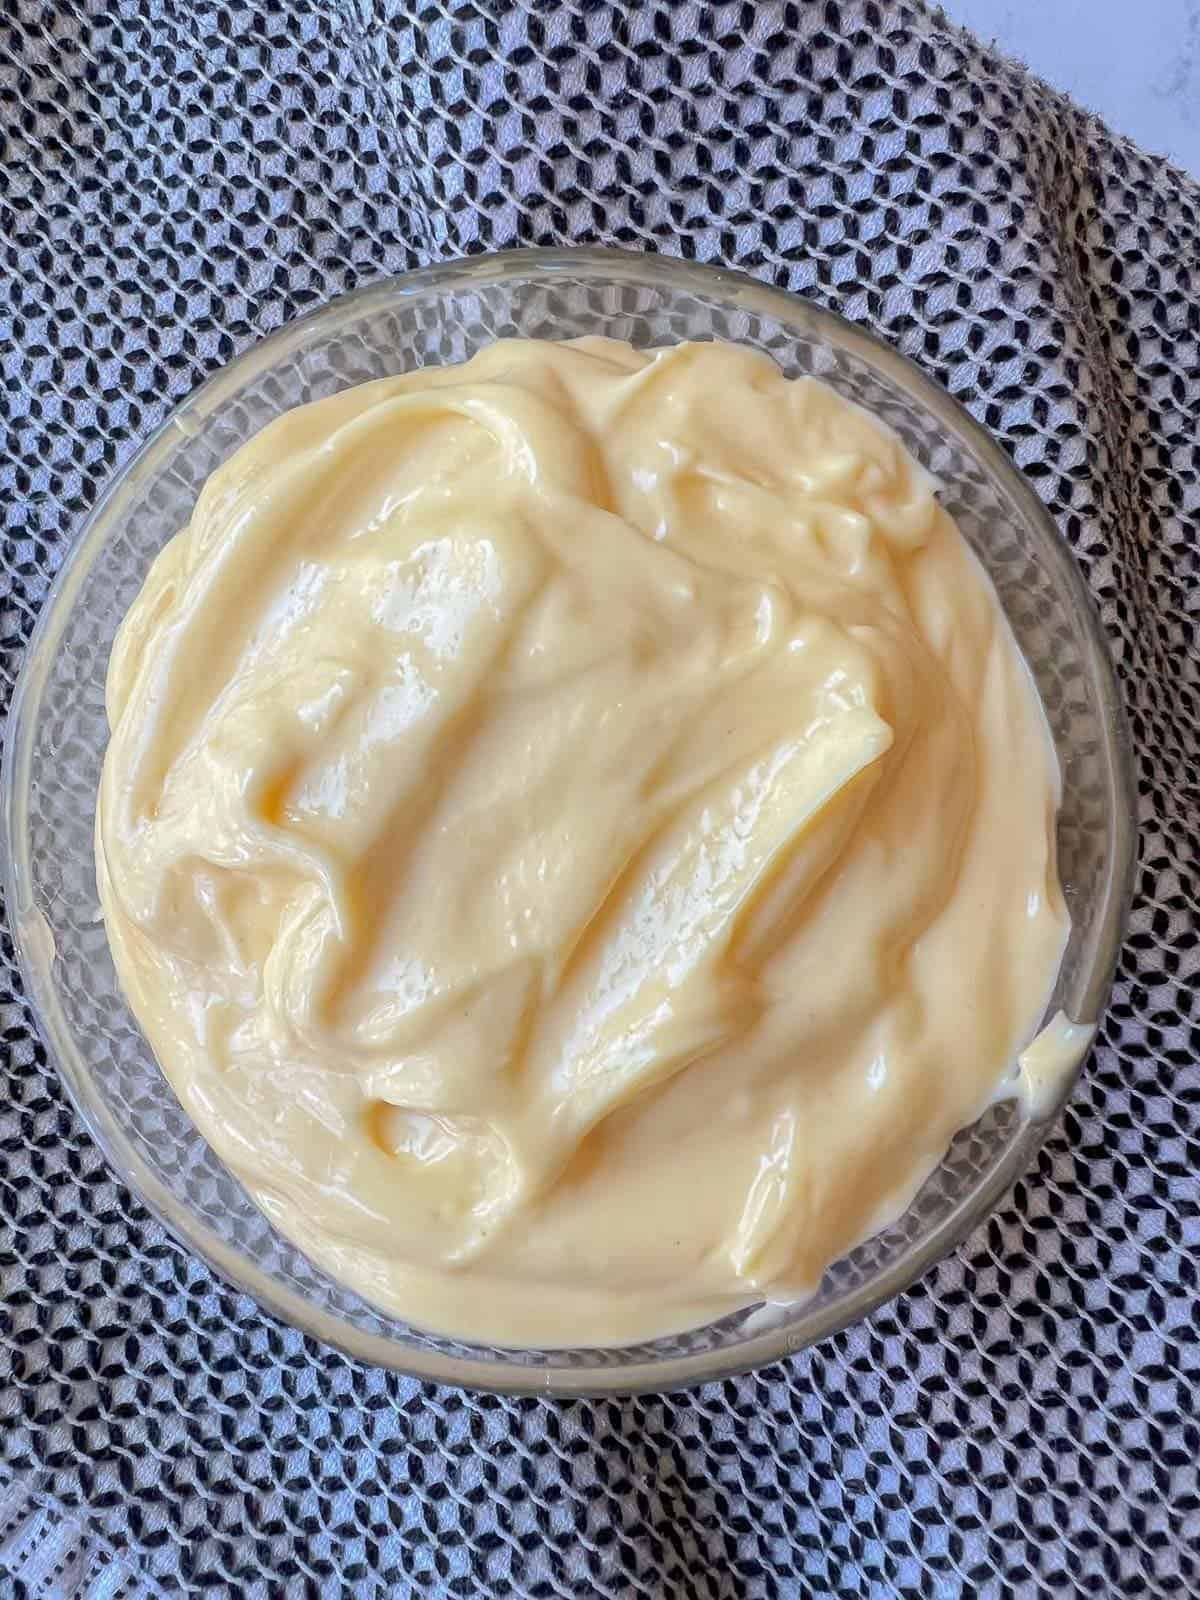 homemade mayo in a glass dish